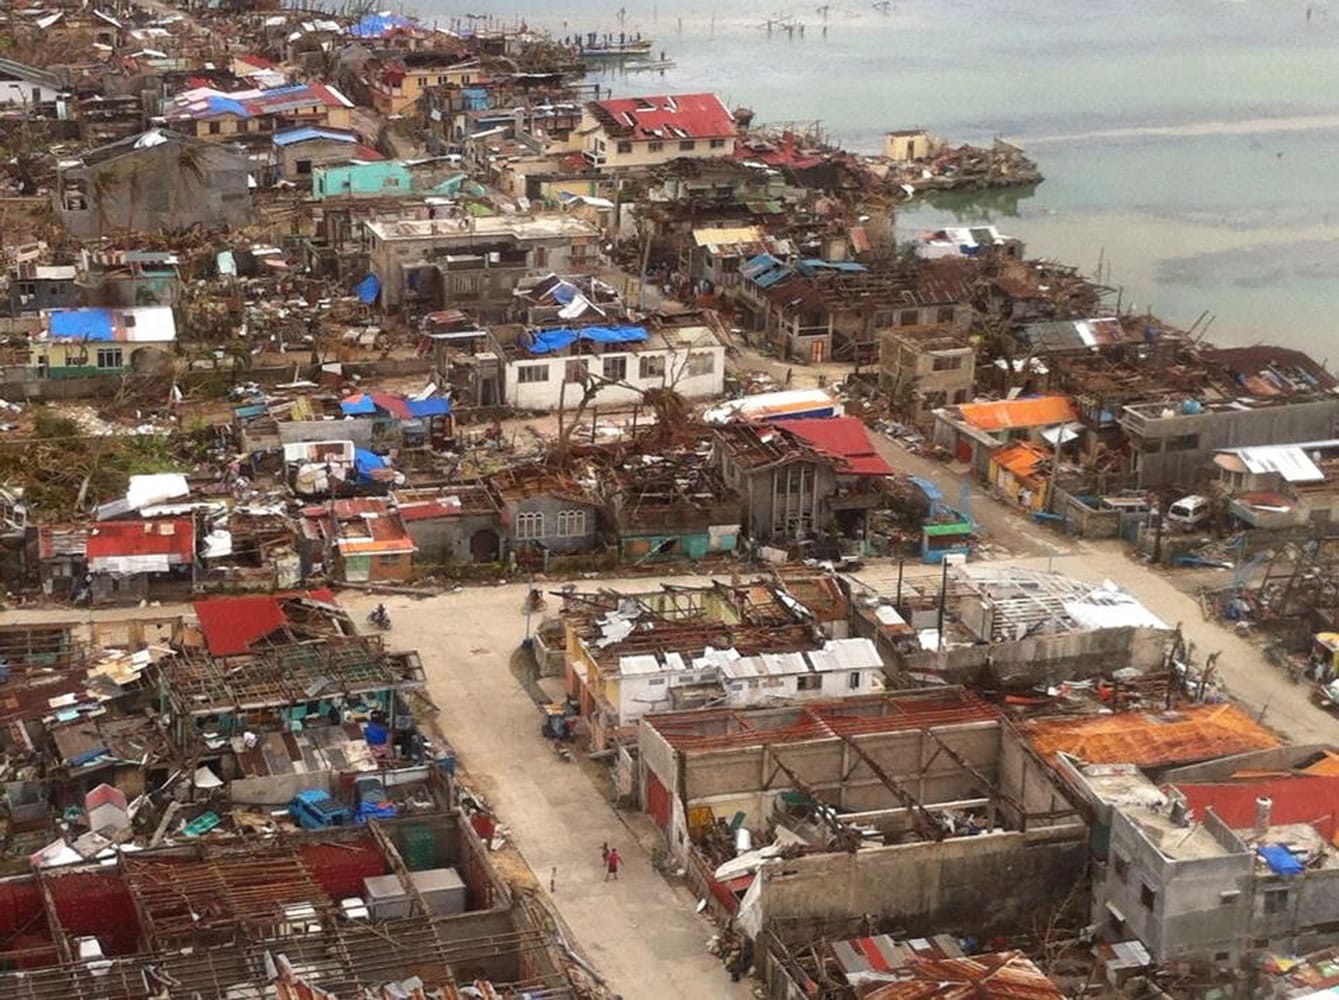 A neighborhood in the Philippines province of Samar lies devastated after super-typhoon Haiyan.